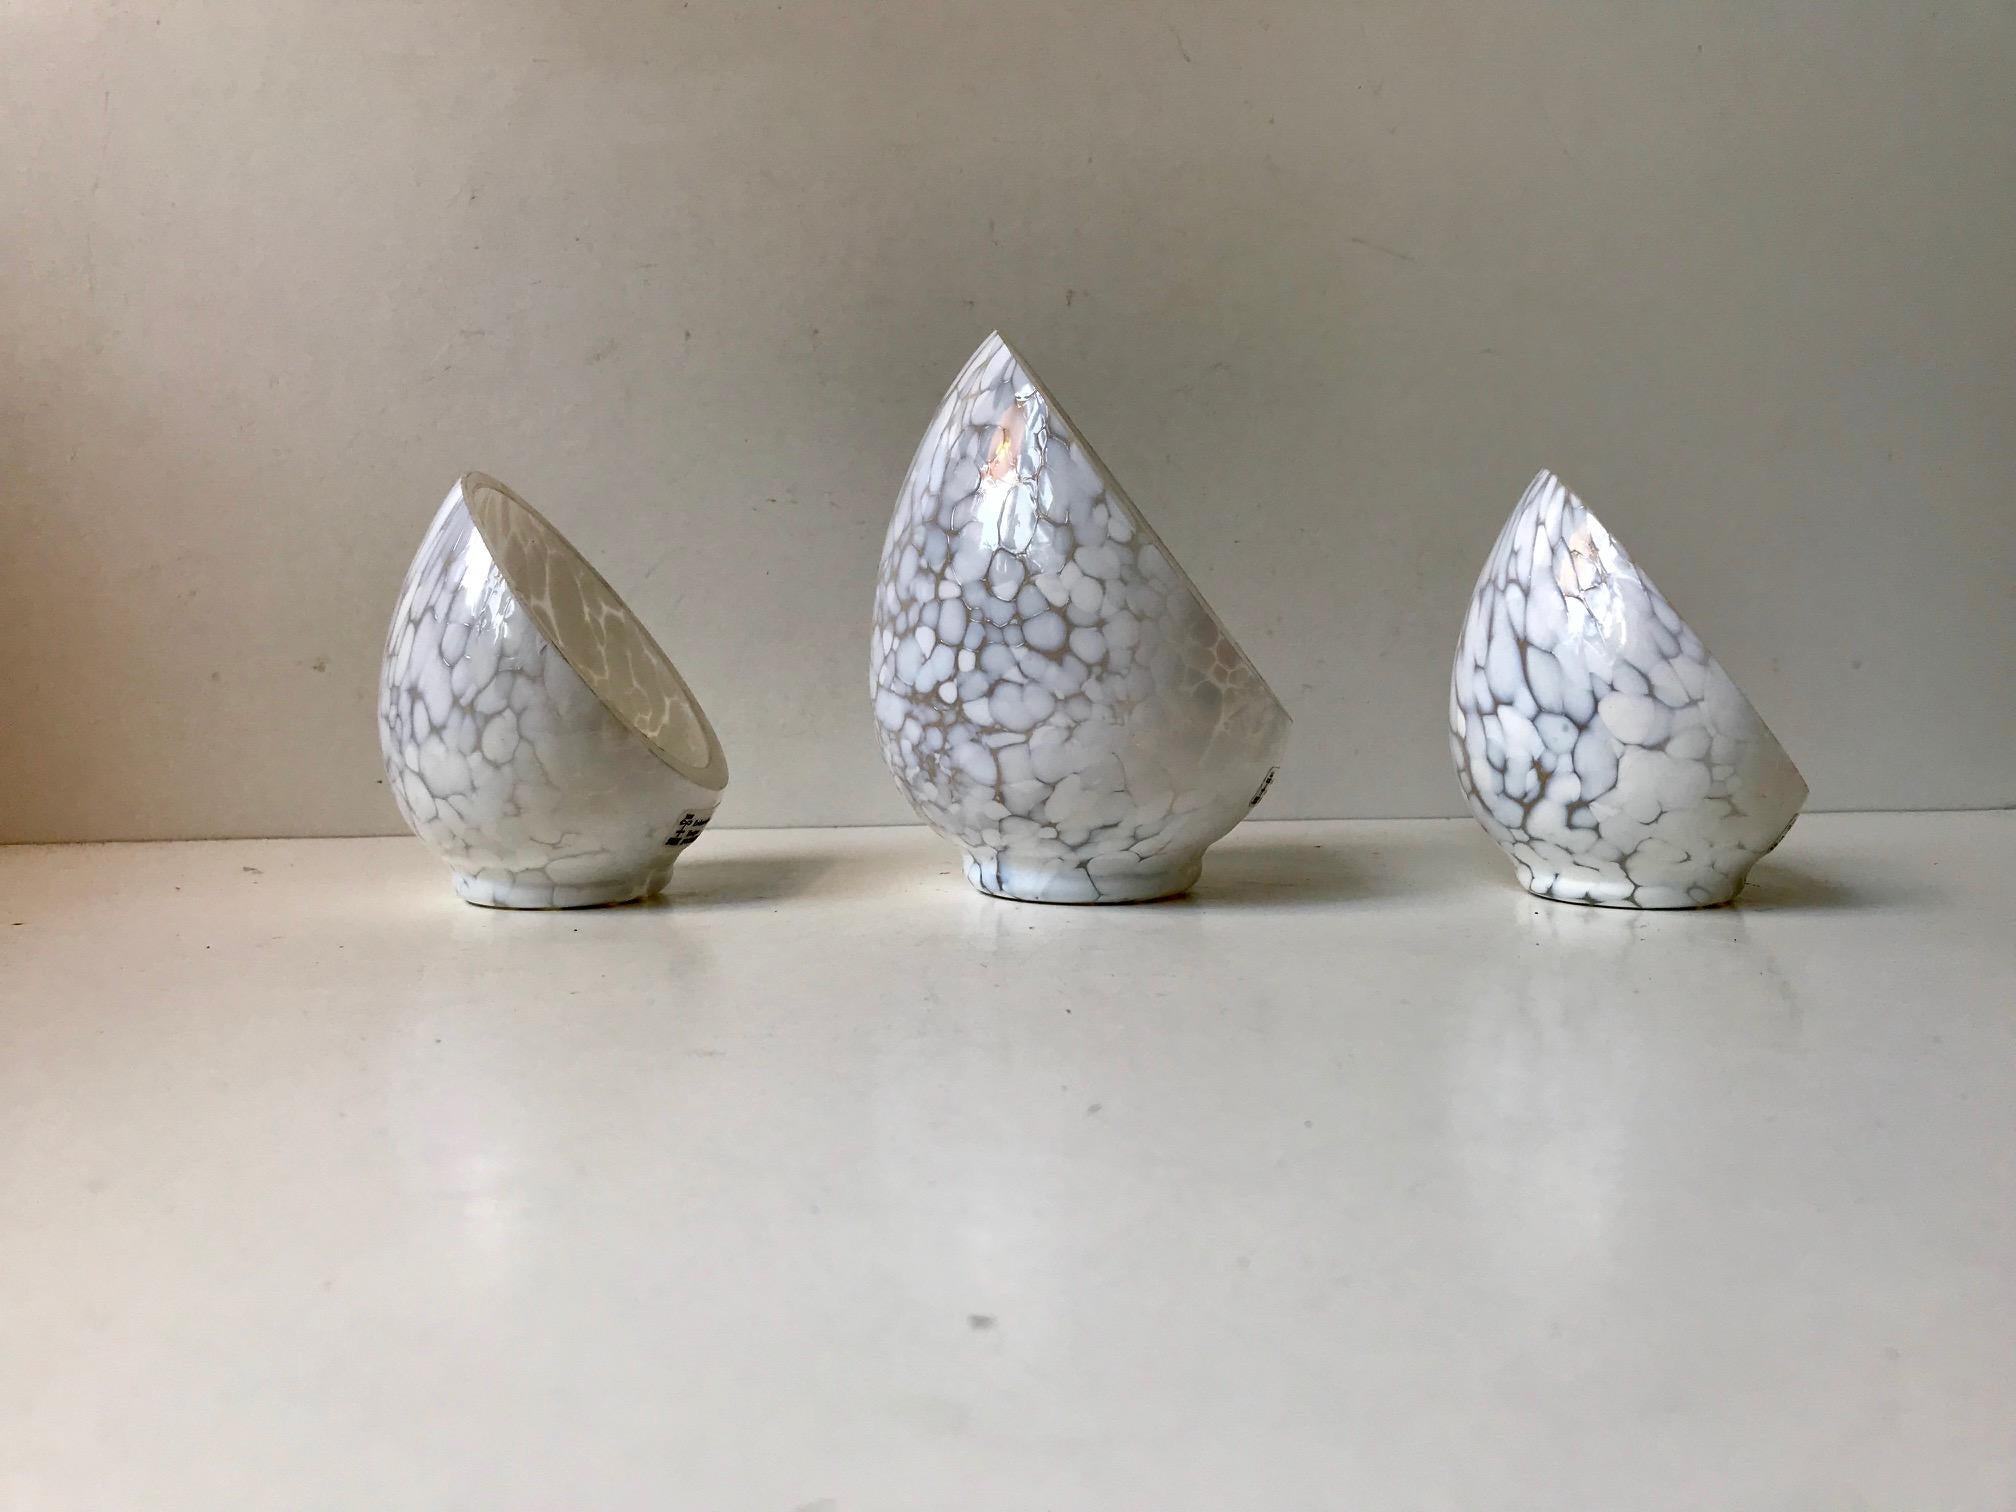 A set of candleholders for tea or bloc candles. Composed of clear and white blister glass, blown and shaped by hand. Designed by Ingegerd Råman and manufactured by Skruf in Sweden during the 1980s-1990s. Please note that one of them is slightly